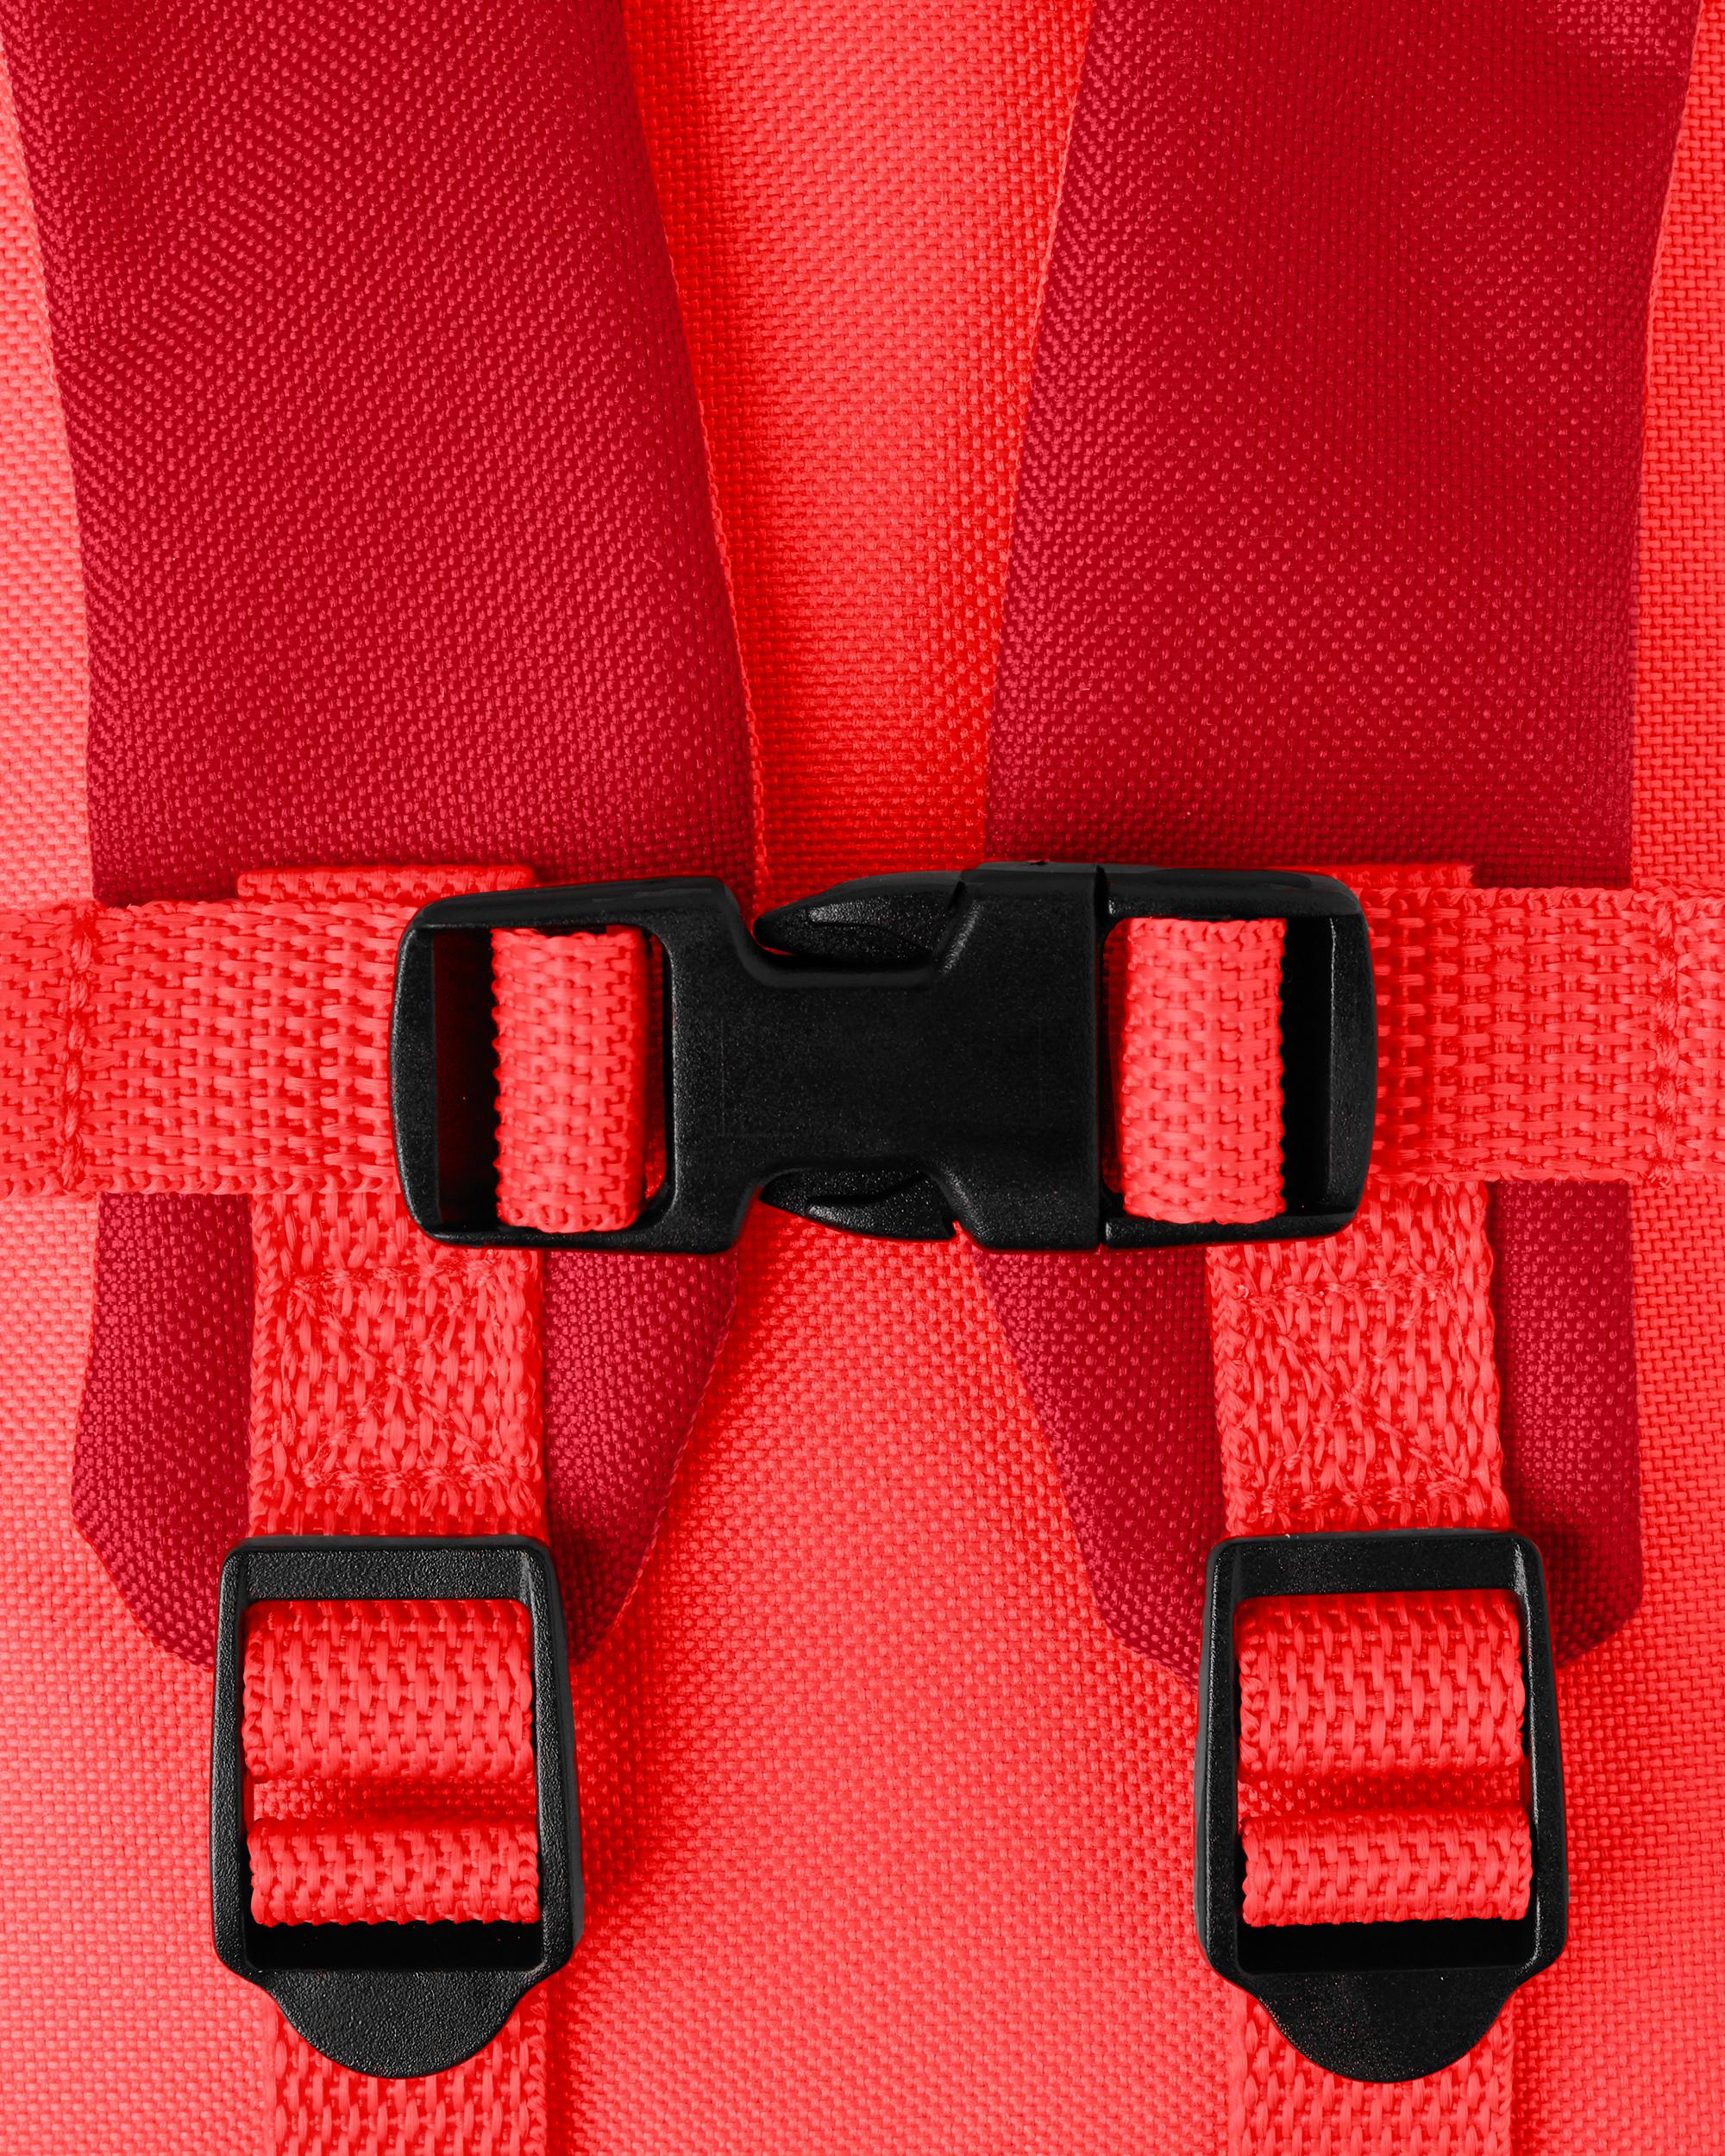 Mini Backpack With Safety Harness - Fox